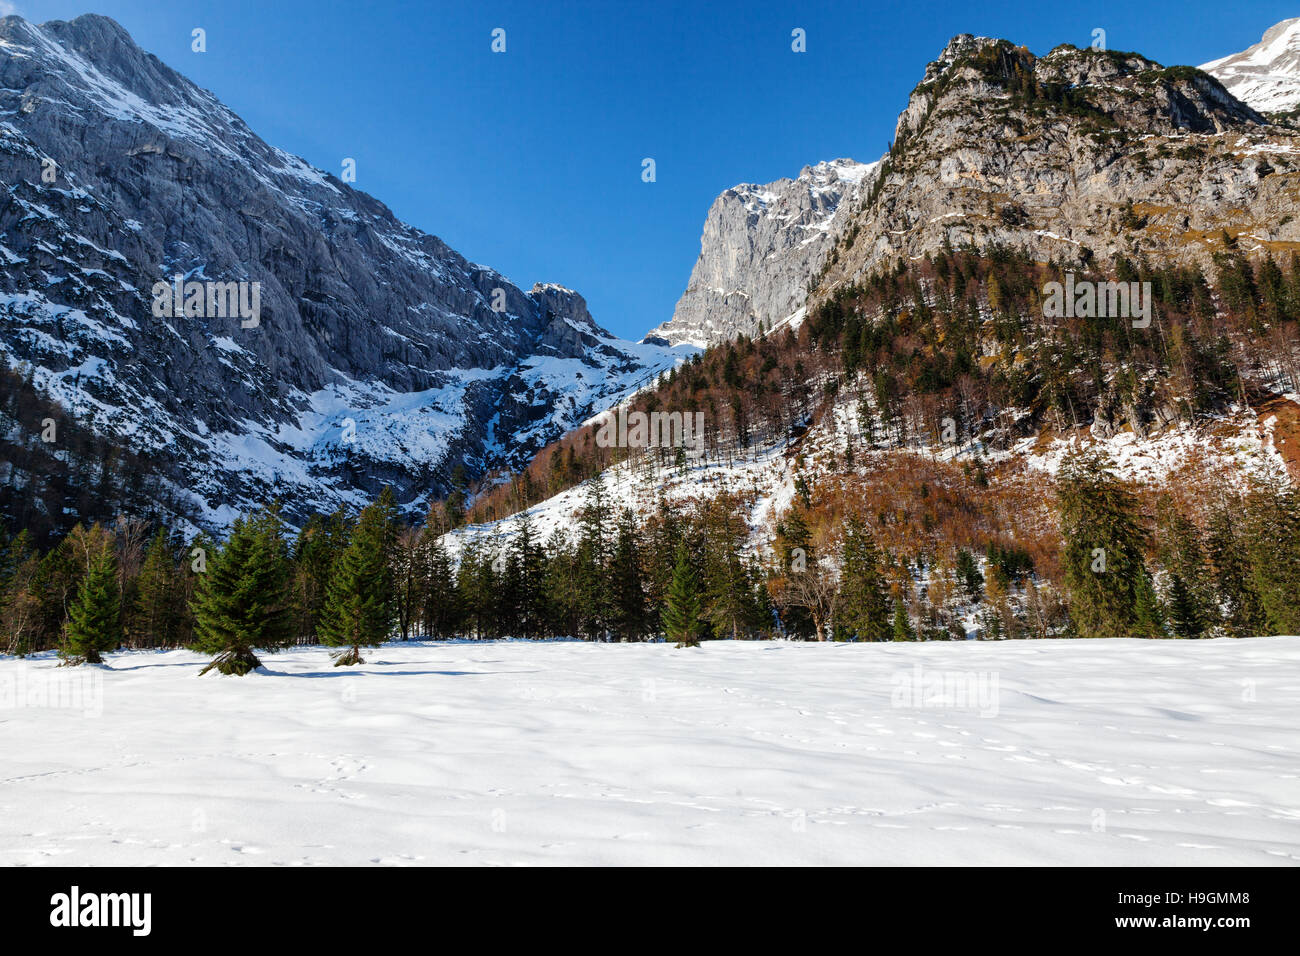 Alps landscape with snow capped mountains in the late autumn season. Stock Photo